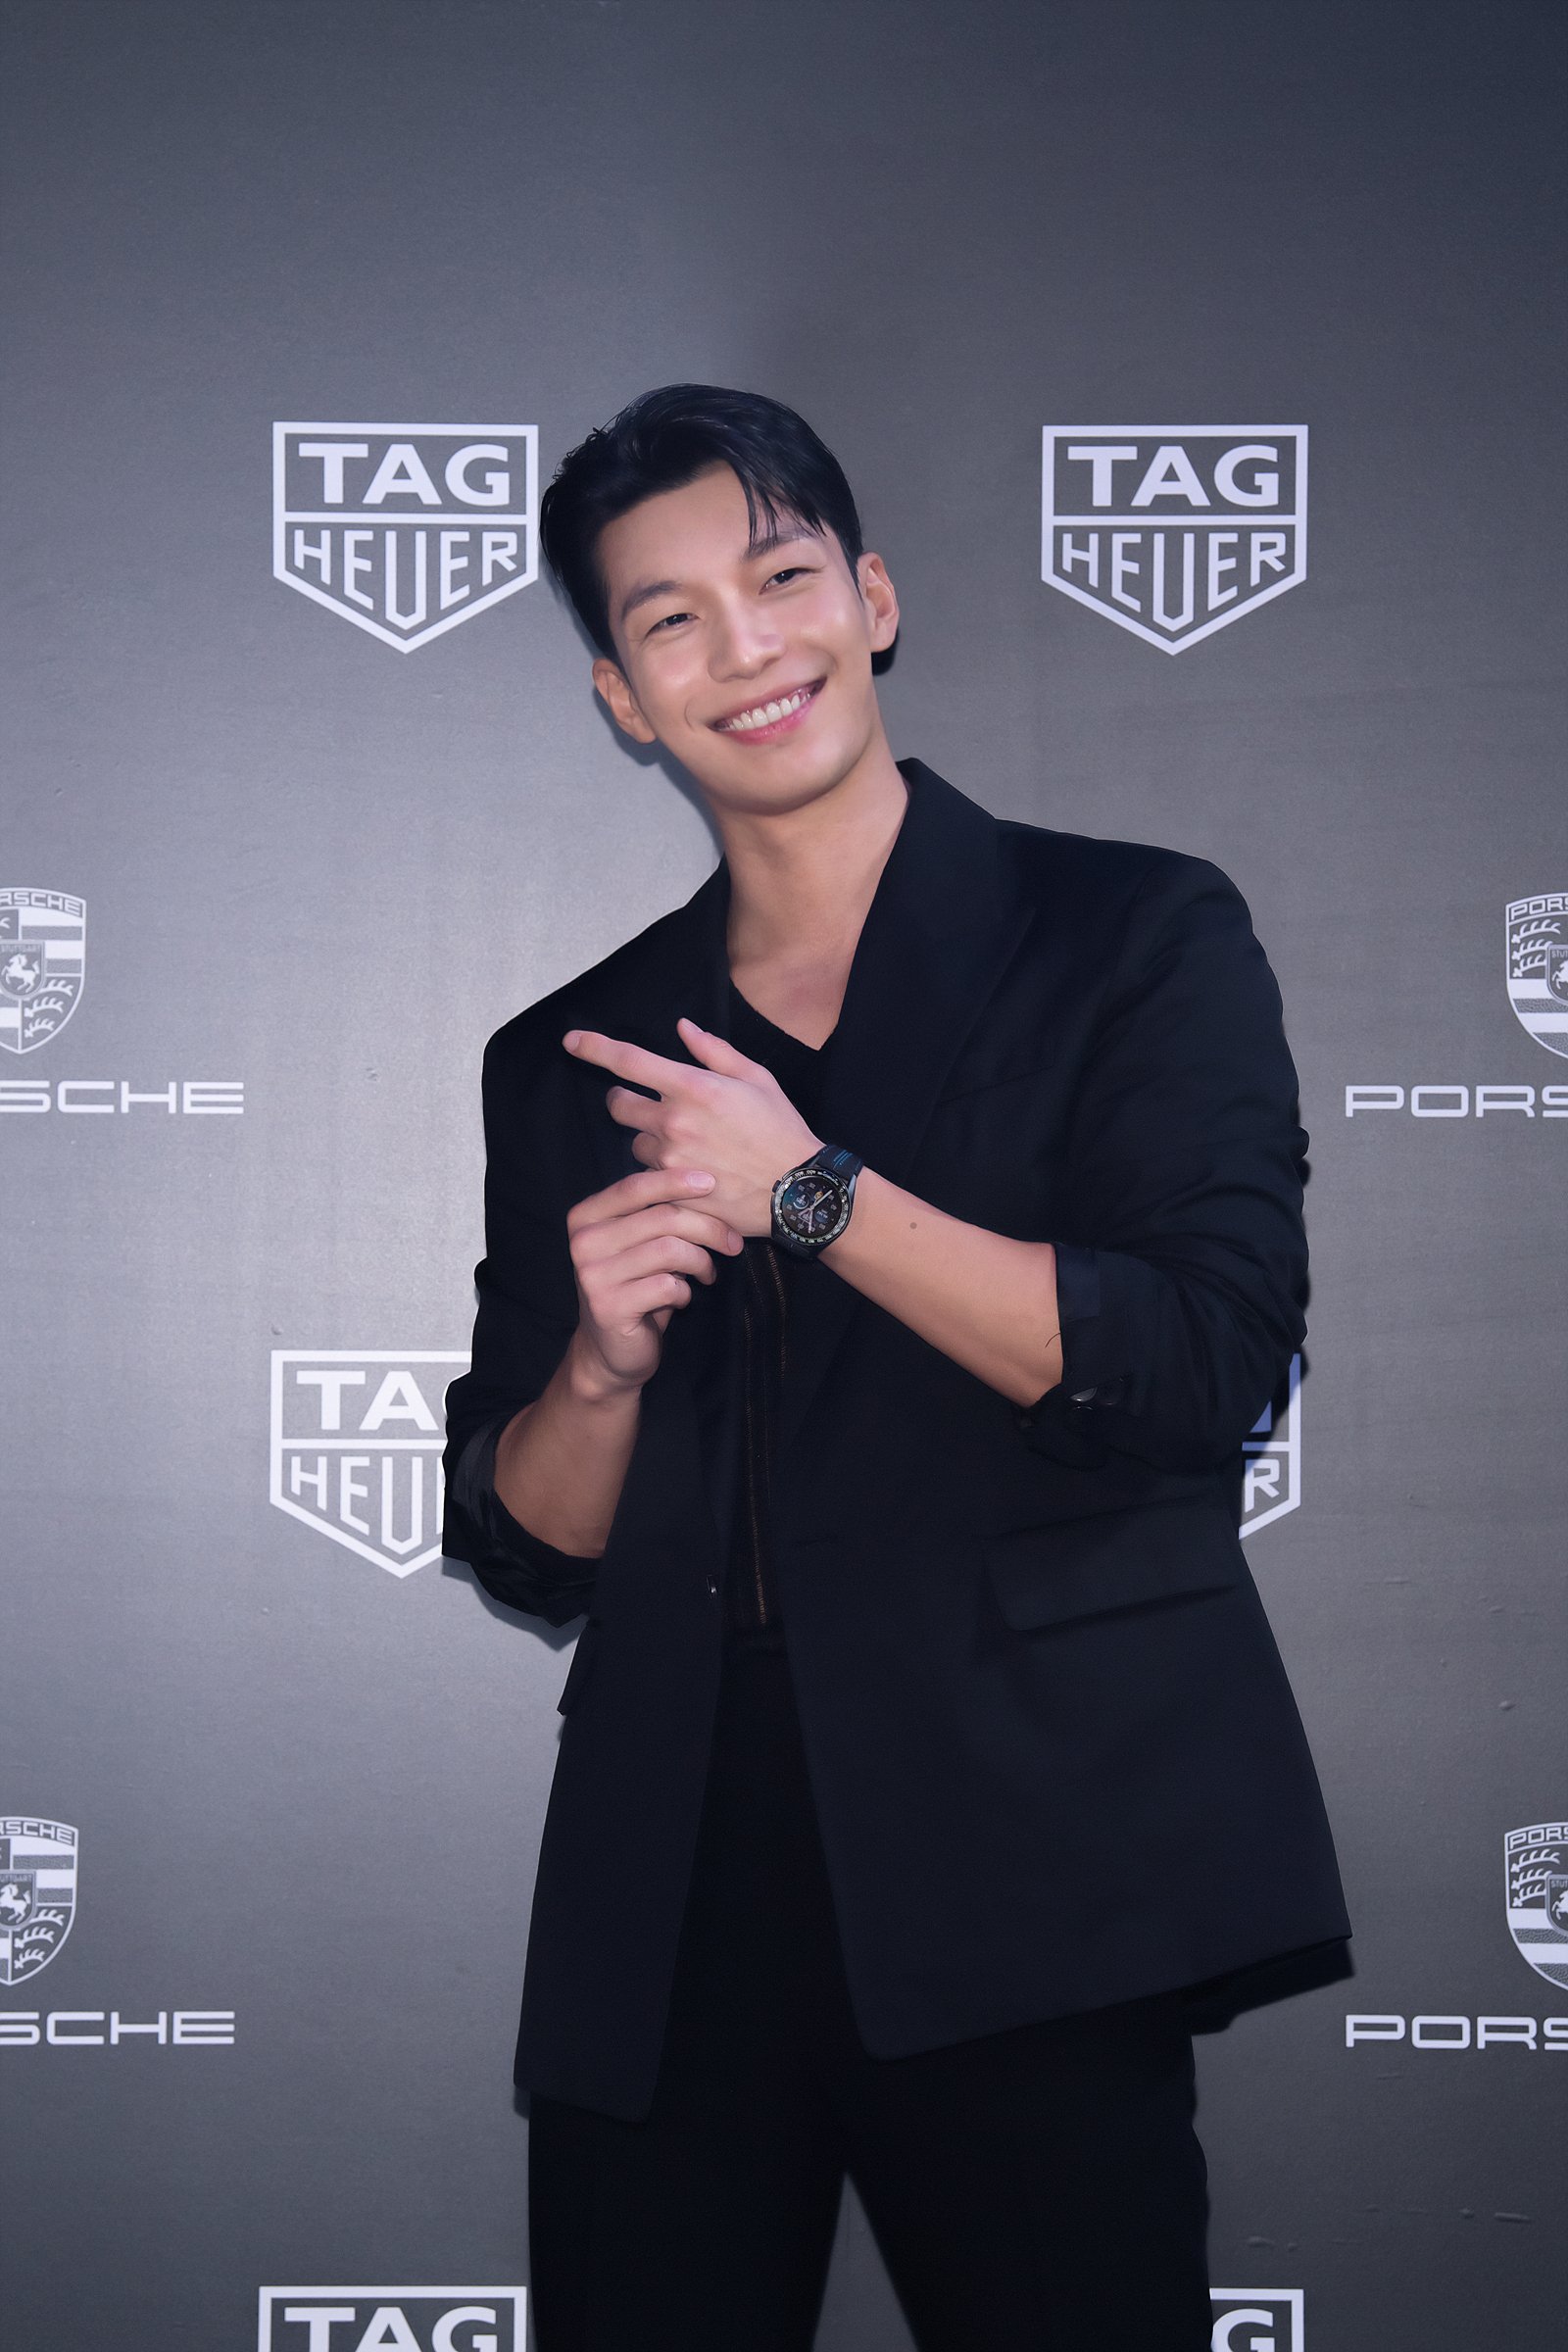 TAG HEUER AND PORSCHE UNVEIL THE NEW TAG HEUER CONNECTED CALIBRE E4 – PORSCHE EDITION WITH A SPECTACULAR EVENT IN SEOUL